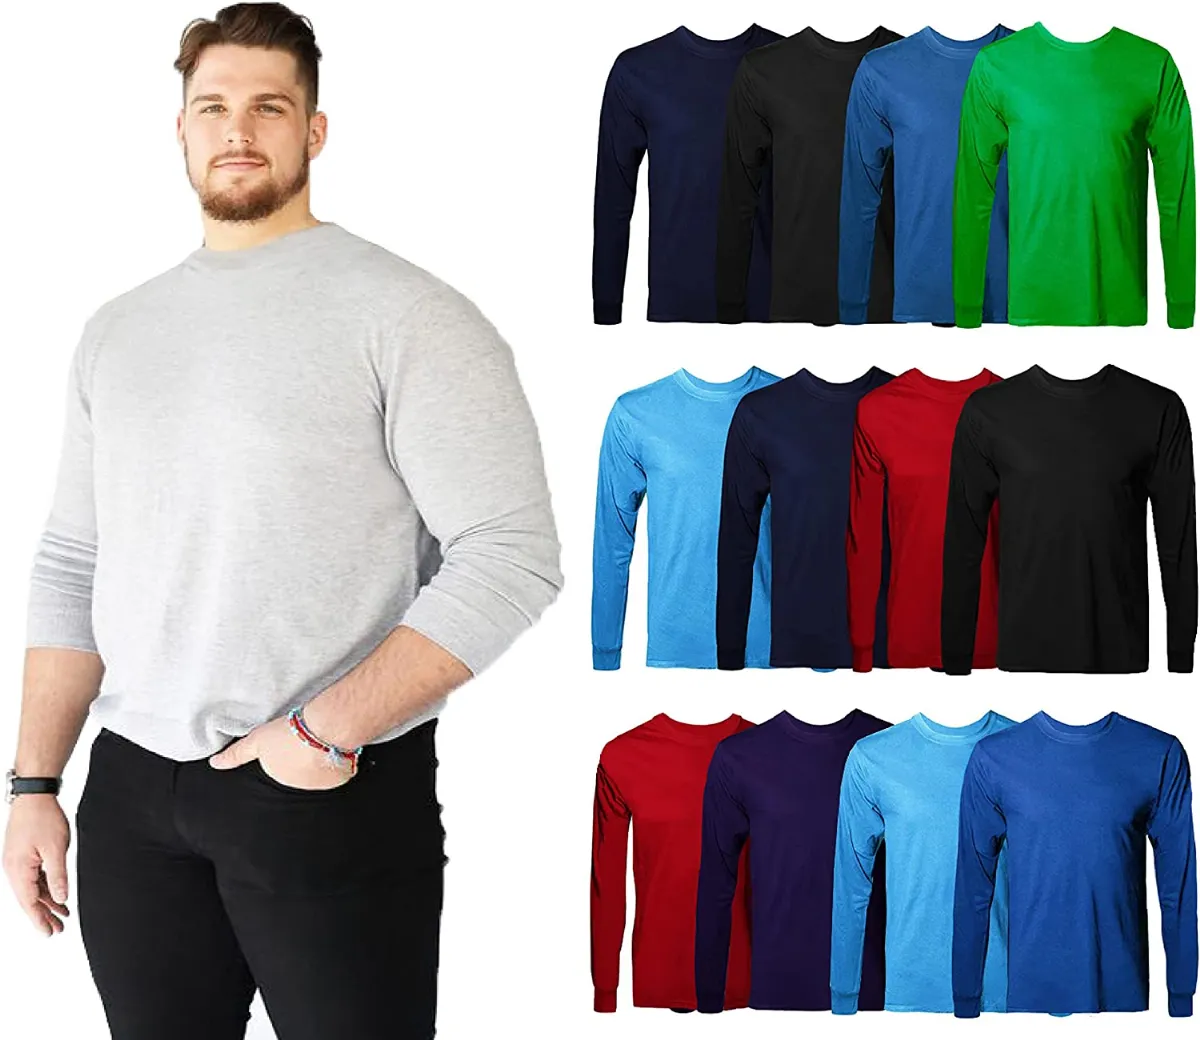 12 Pieces of Mens Cotton Long Sleeve Tee Shirt Assorted Colors Size 2x Large